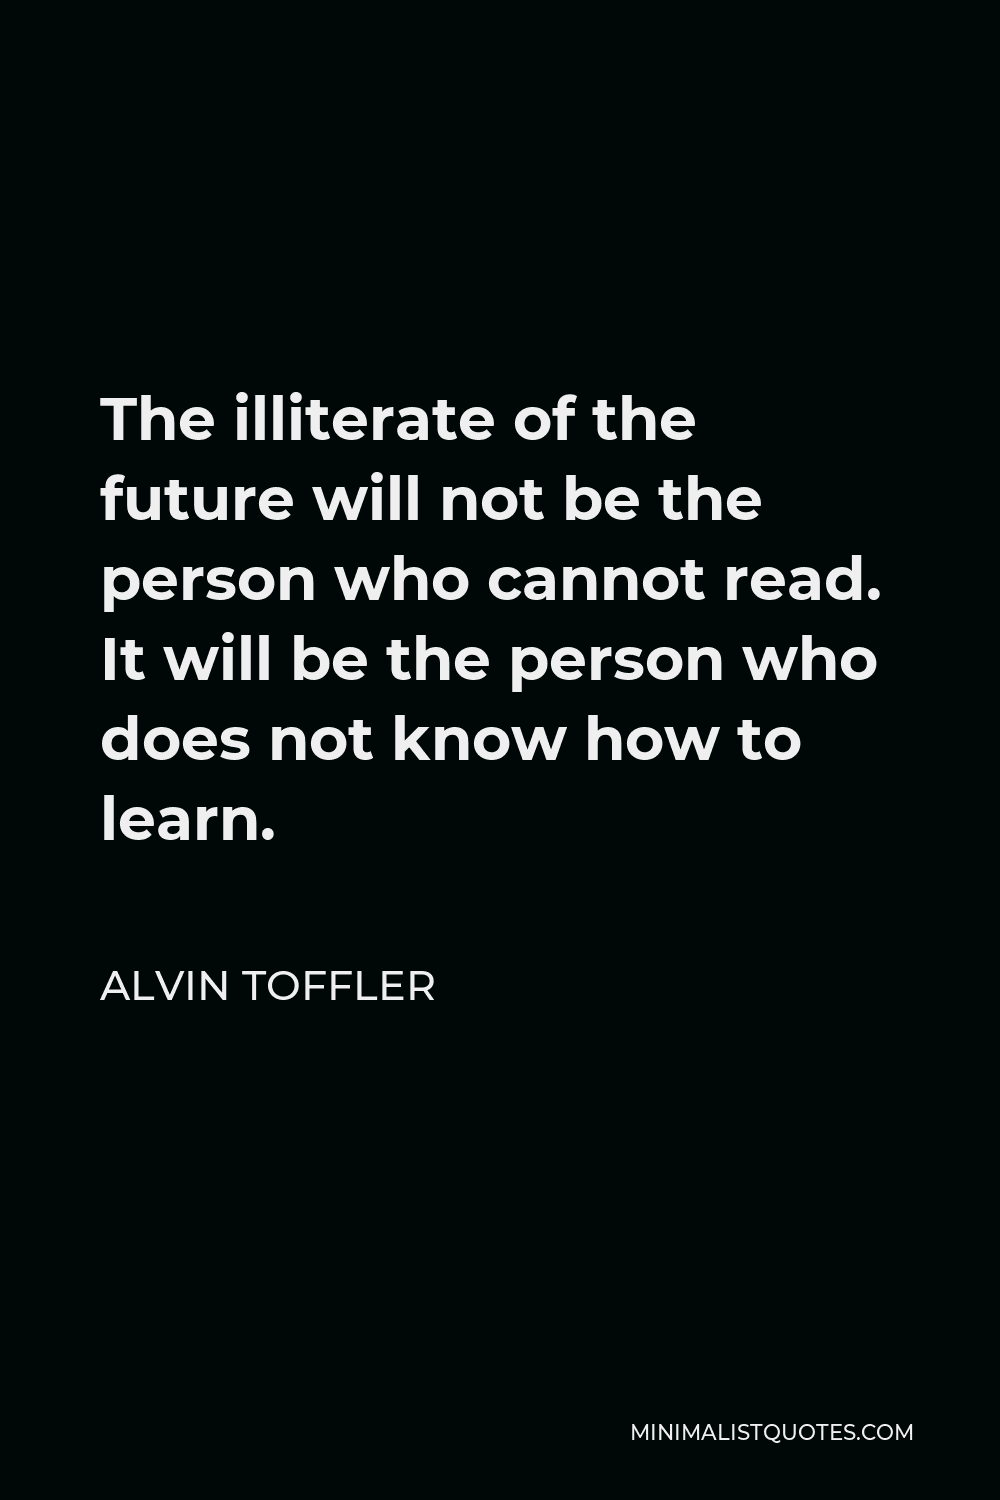 Alvin Toffler Quote - The illiterate of the future will not be the person who cannot read. It will be the person who does not know how to learn.